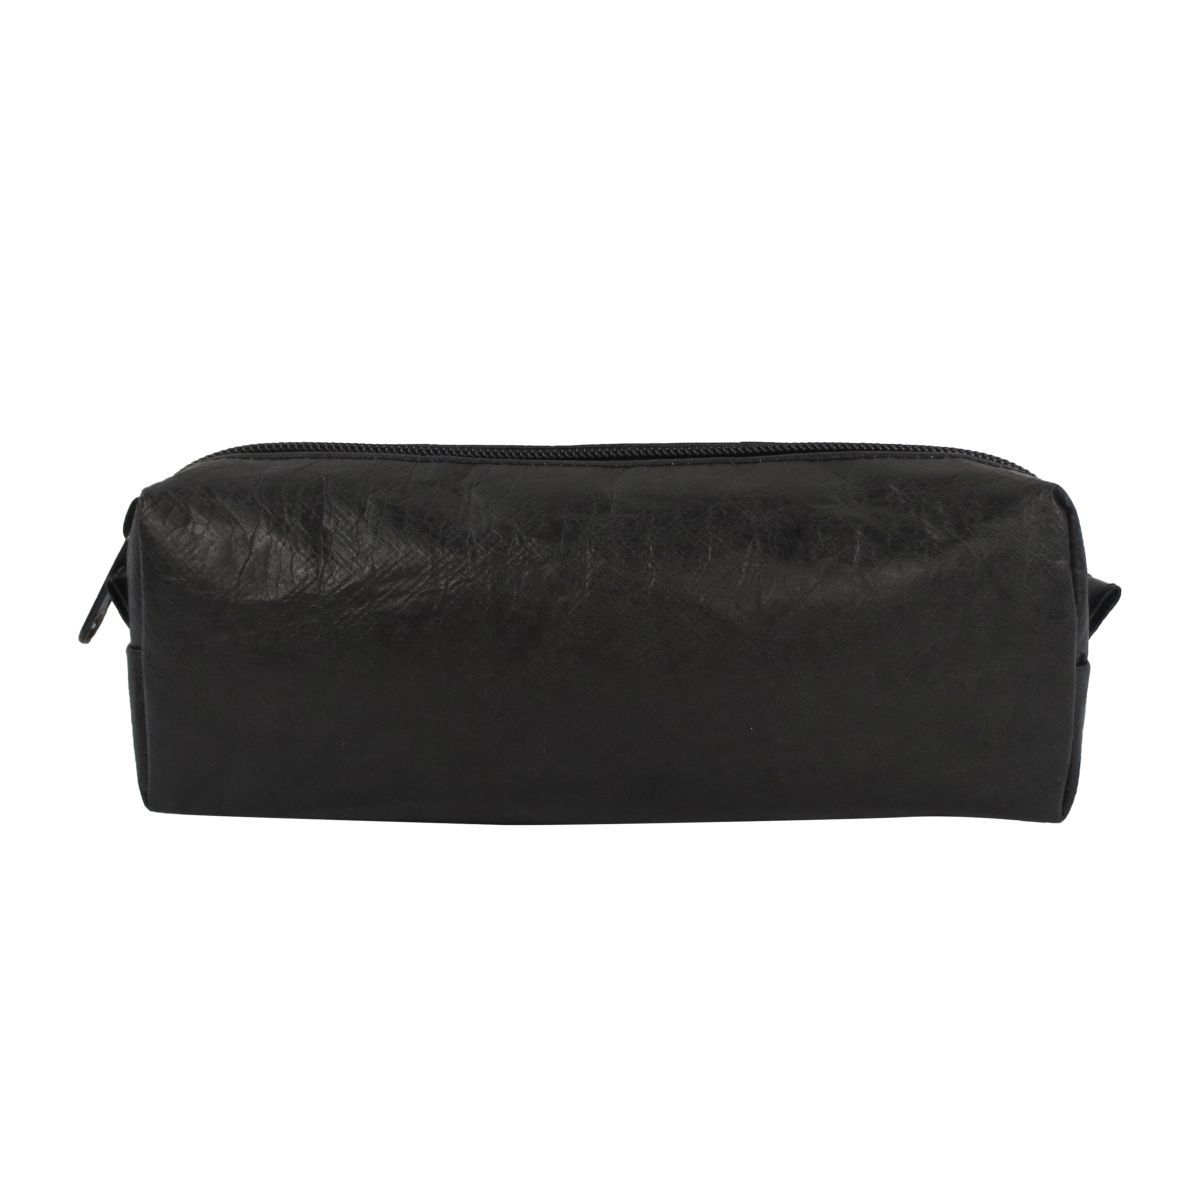 Trousse rectangulaire Noire - Time for paper - Marks-store